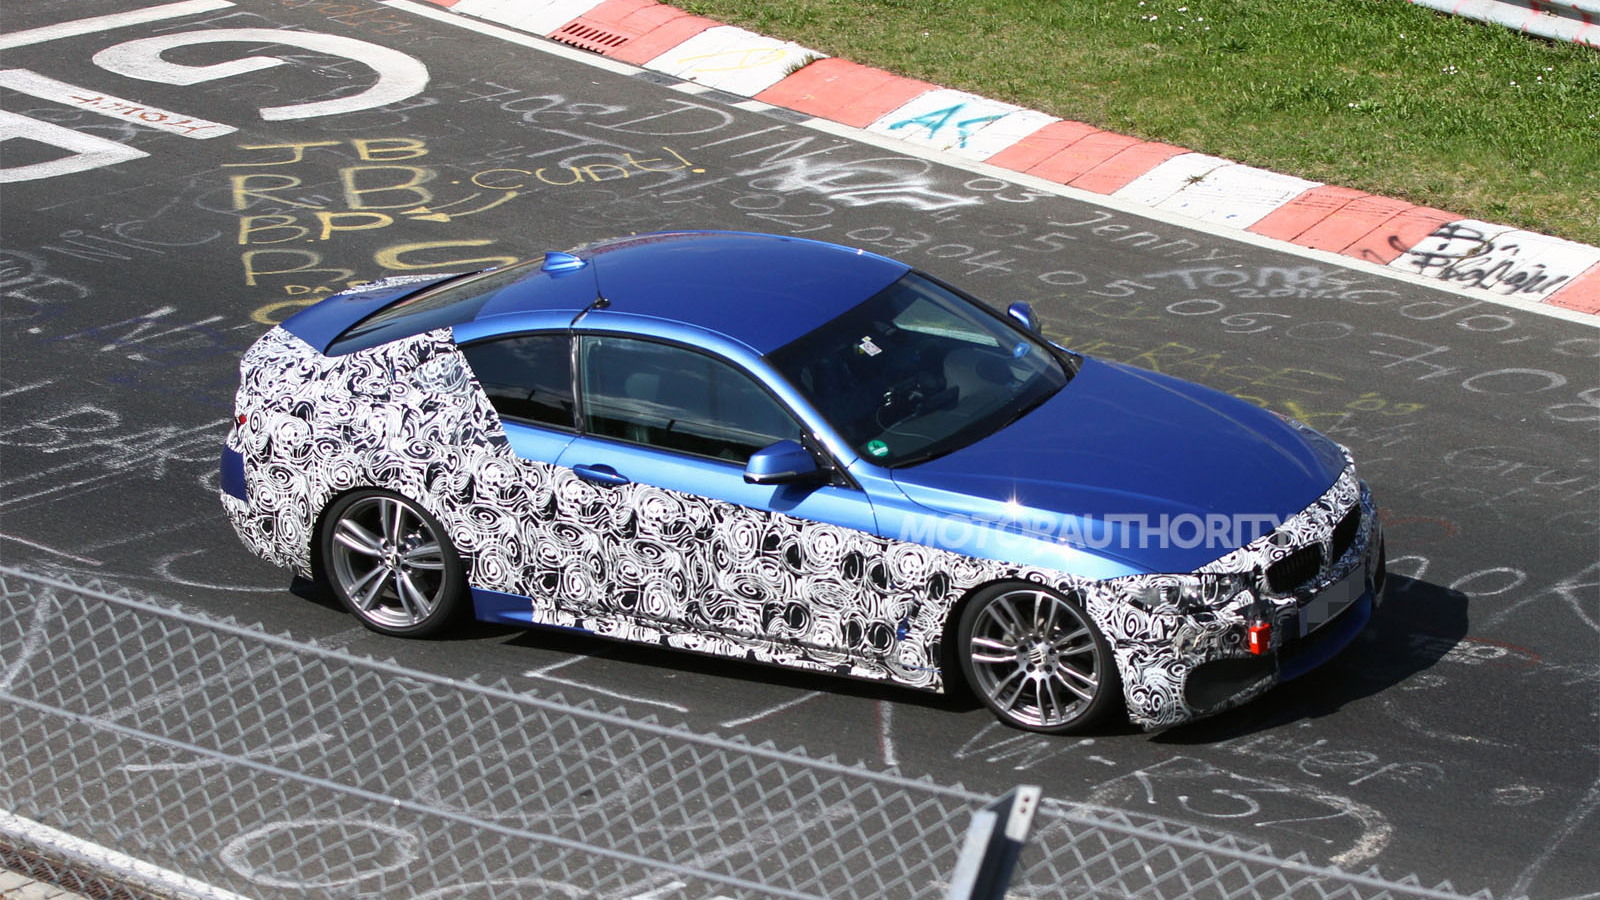 2014 BMW 4-Series Coupe spy shots (with M Sport Package)